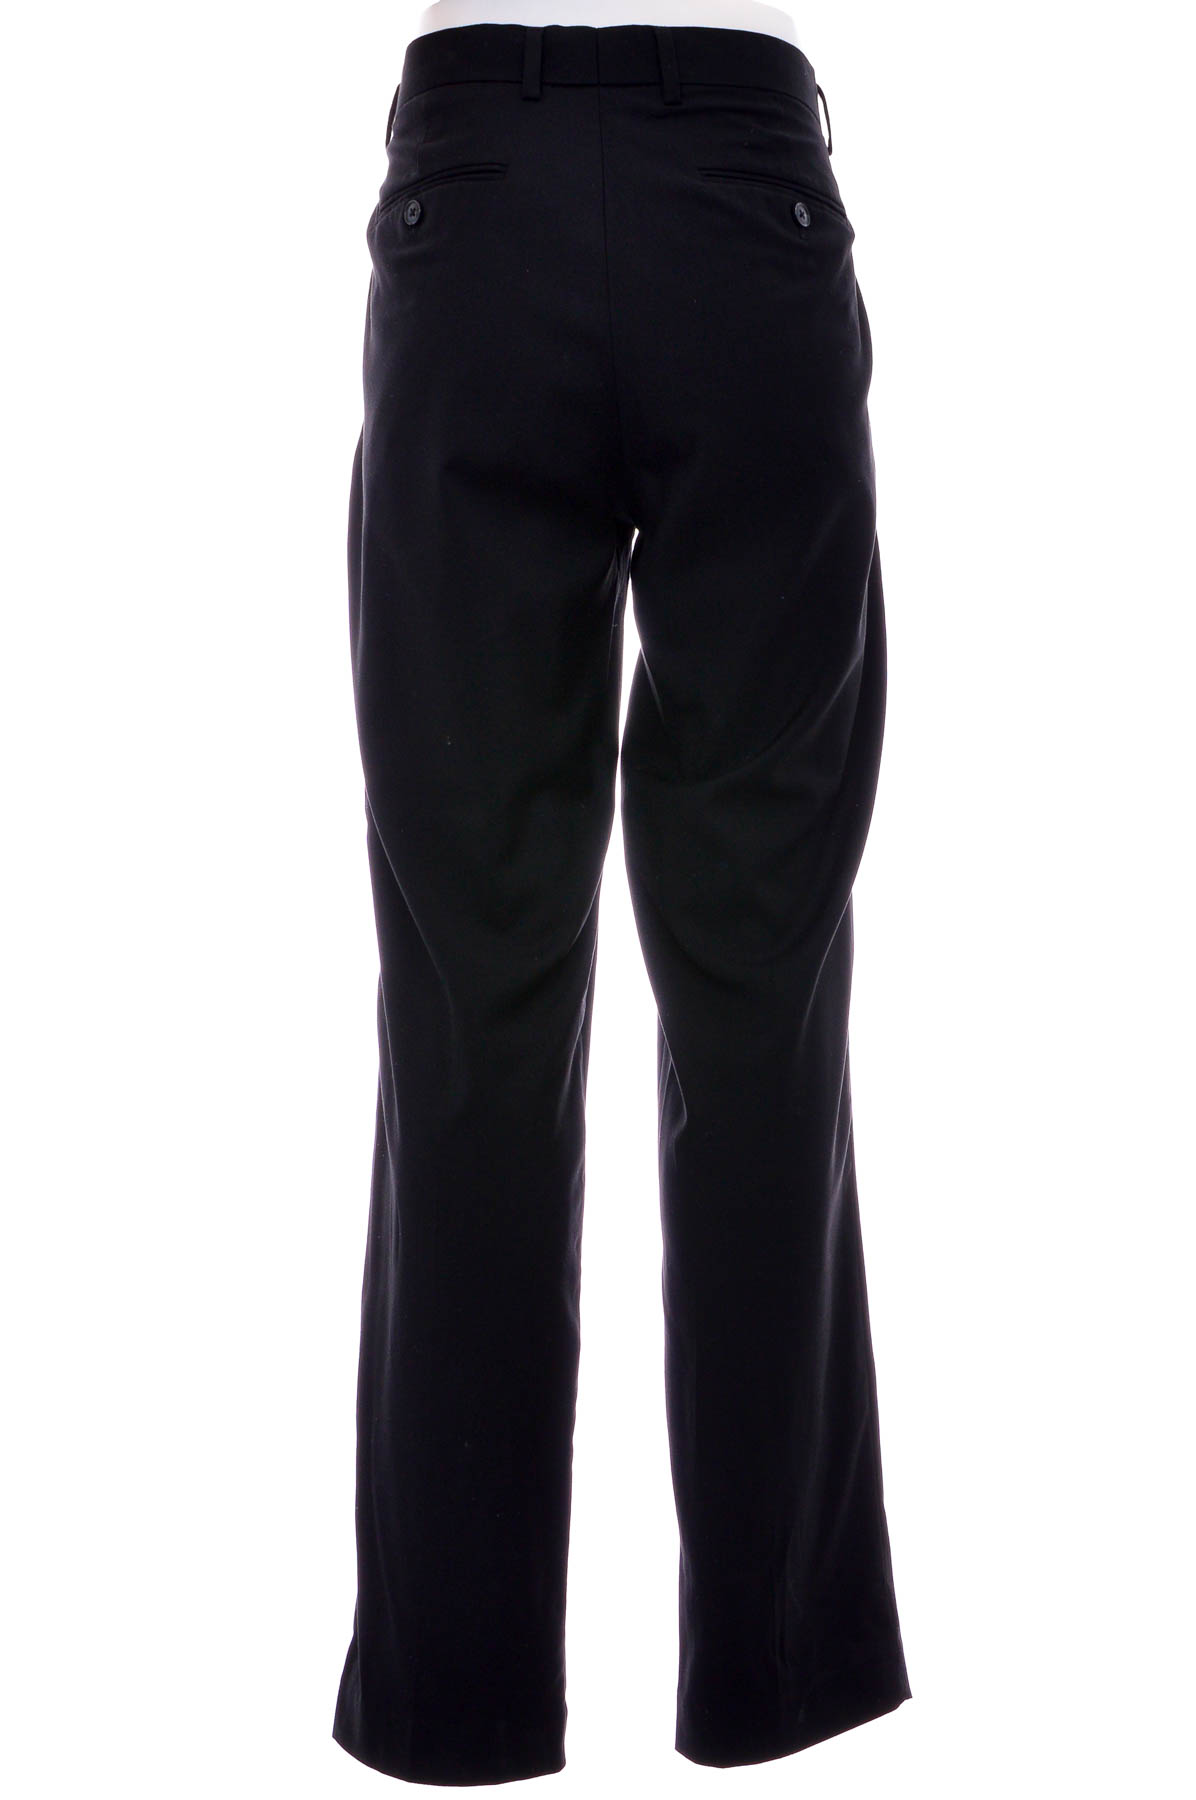 Men's trousers - PREVIEW - 1